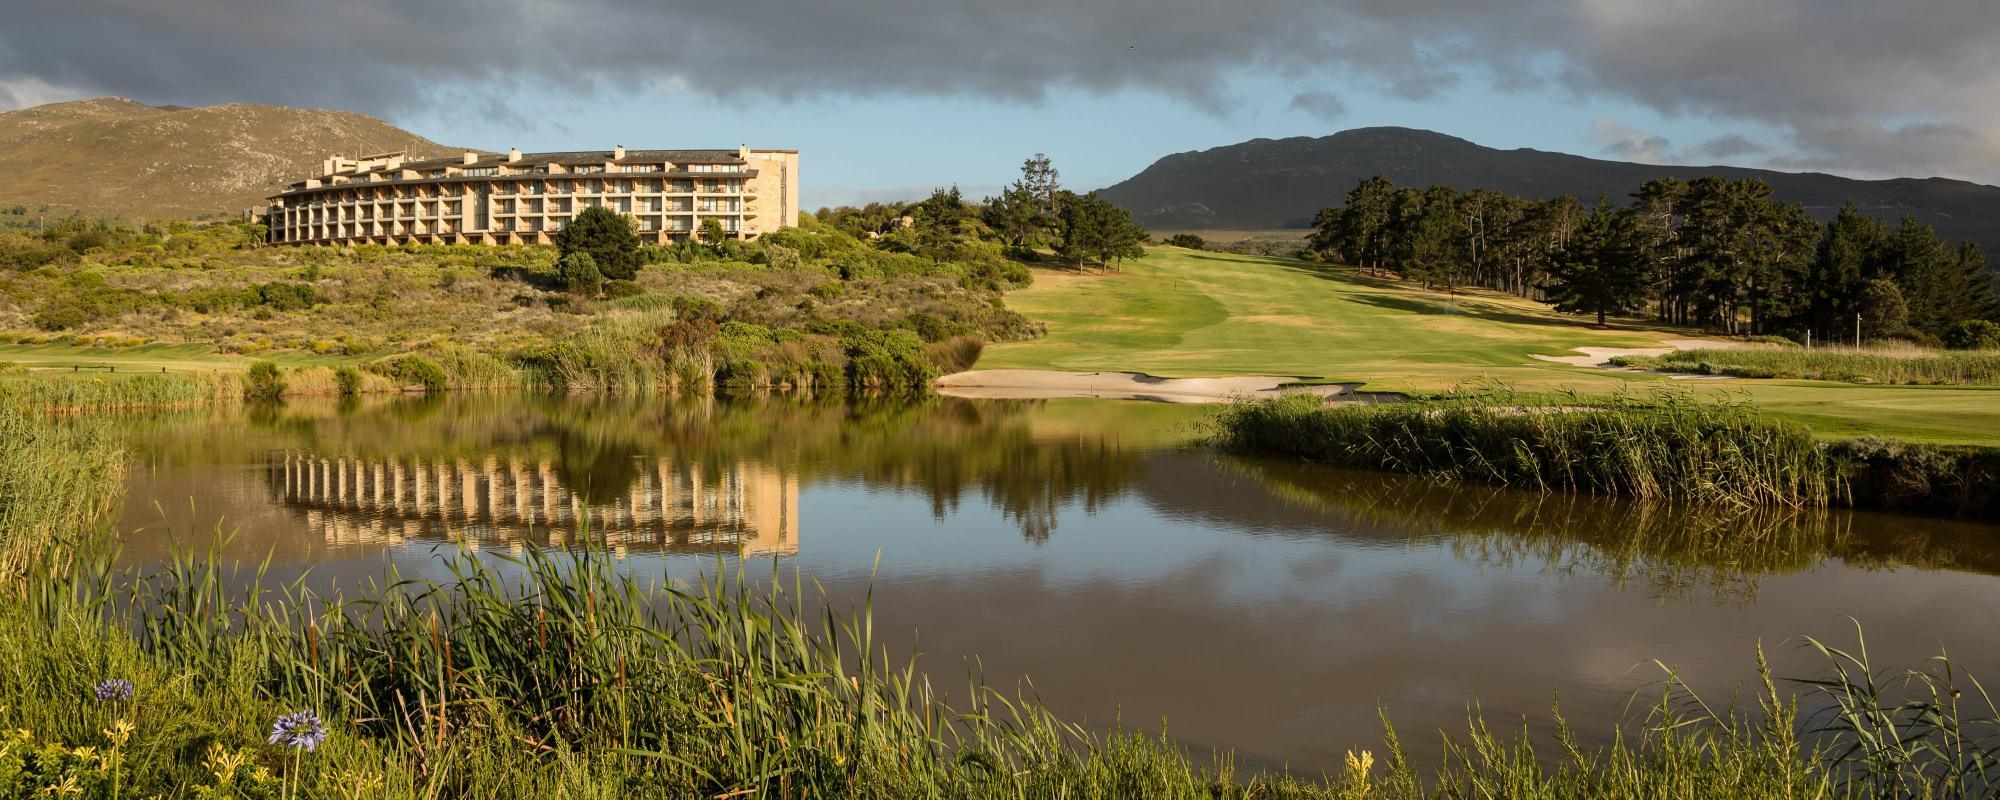 All The Arabella Hotel  Spa's impressive golf course within sensational South Africa.